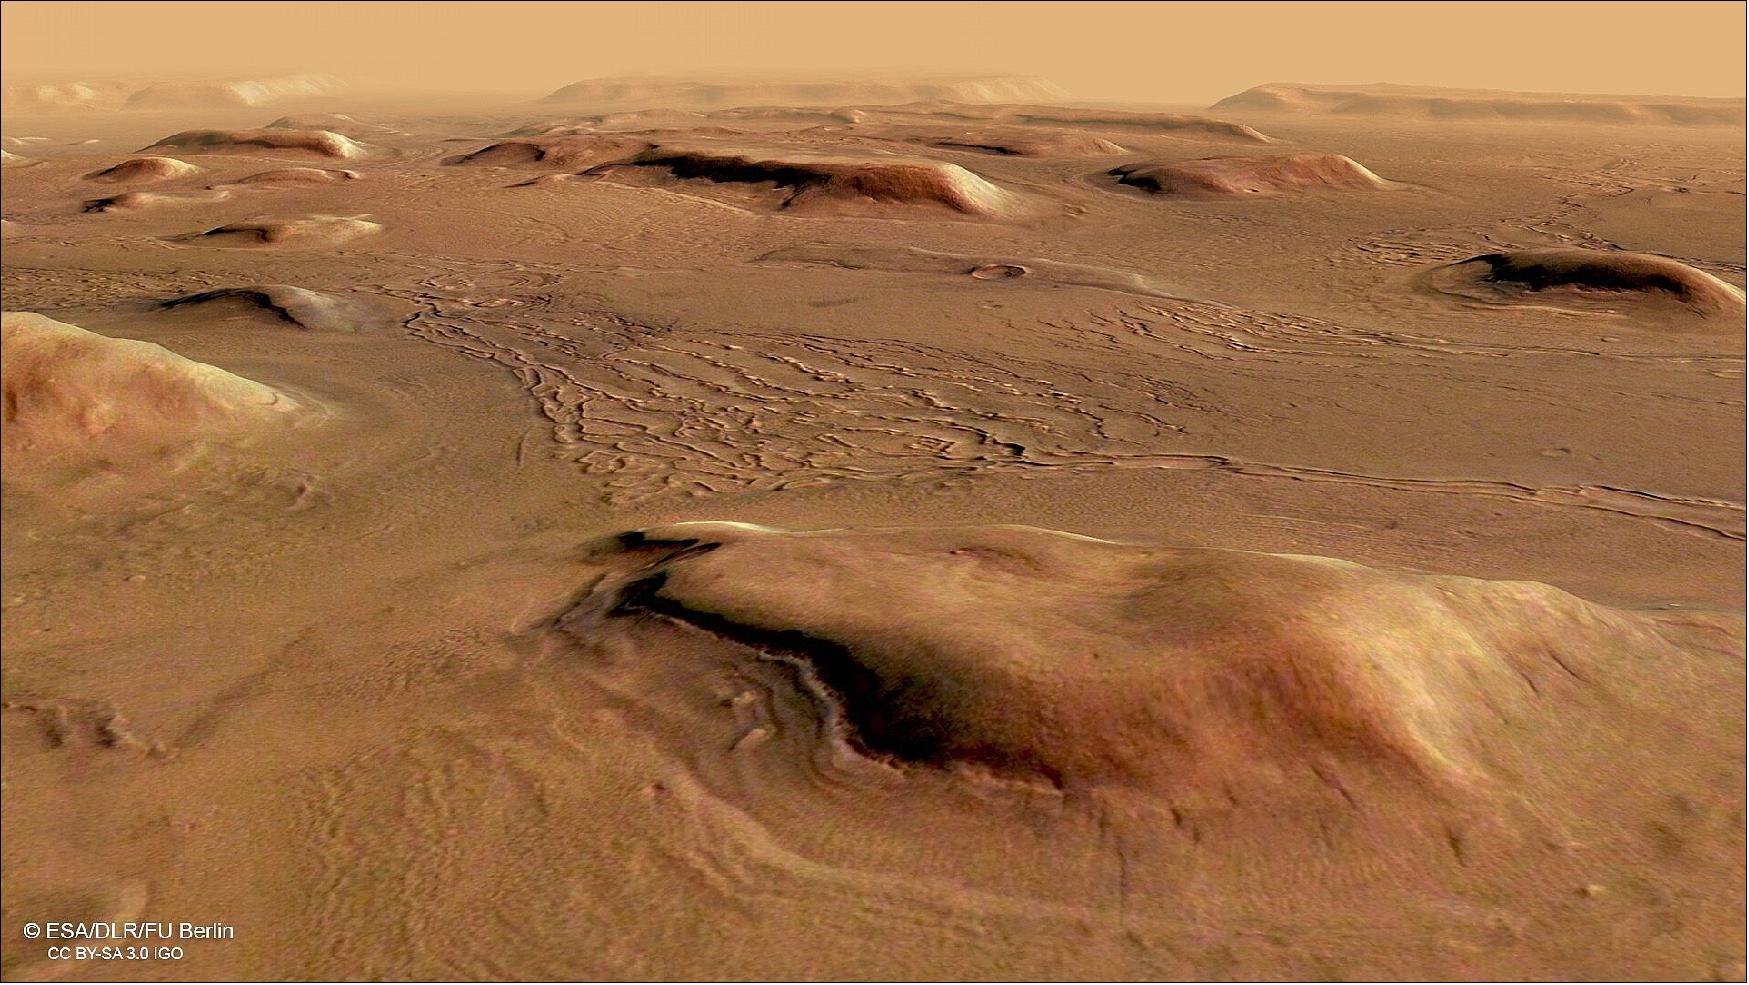 Figure 6: Perspective view of Deuteronilus Mensae. This image from ESA's Mars Express shows a region of Mars named Deuteronilus Mensae. This oblique perspective view was generated using a digital terrain model and Mars Express data gathered on 25 February 2018 during orbit 17913. The ground resolution is approximately 13 m/pixel and the images are centered at about 25.5ºE/44ºN. This image was created using data from the nadir and color channels of the High Resolution Stereo Camera (HRSC). The nadir channel is aligned perpendicular to the surface of Mars, as if looking straight down at the surface.